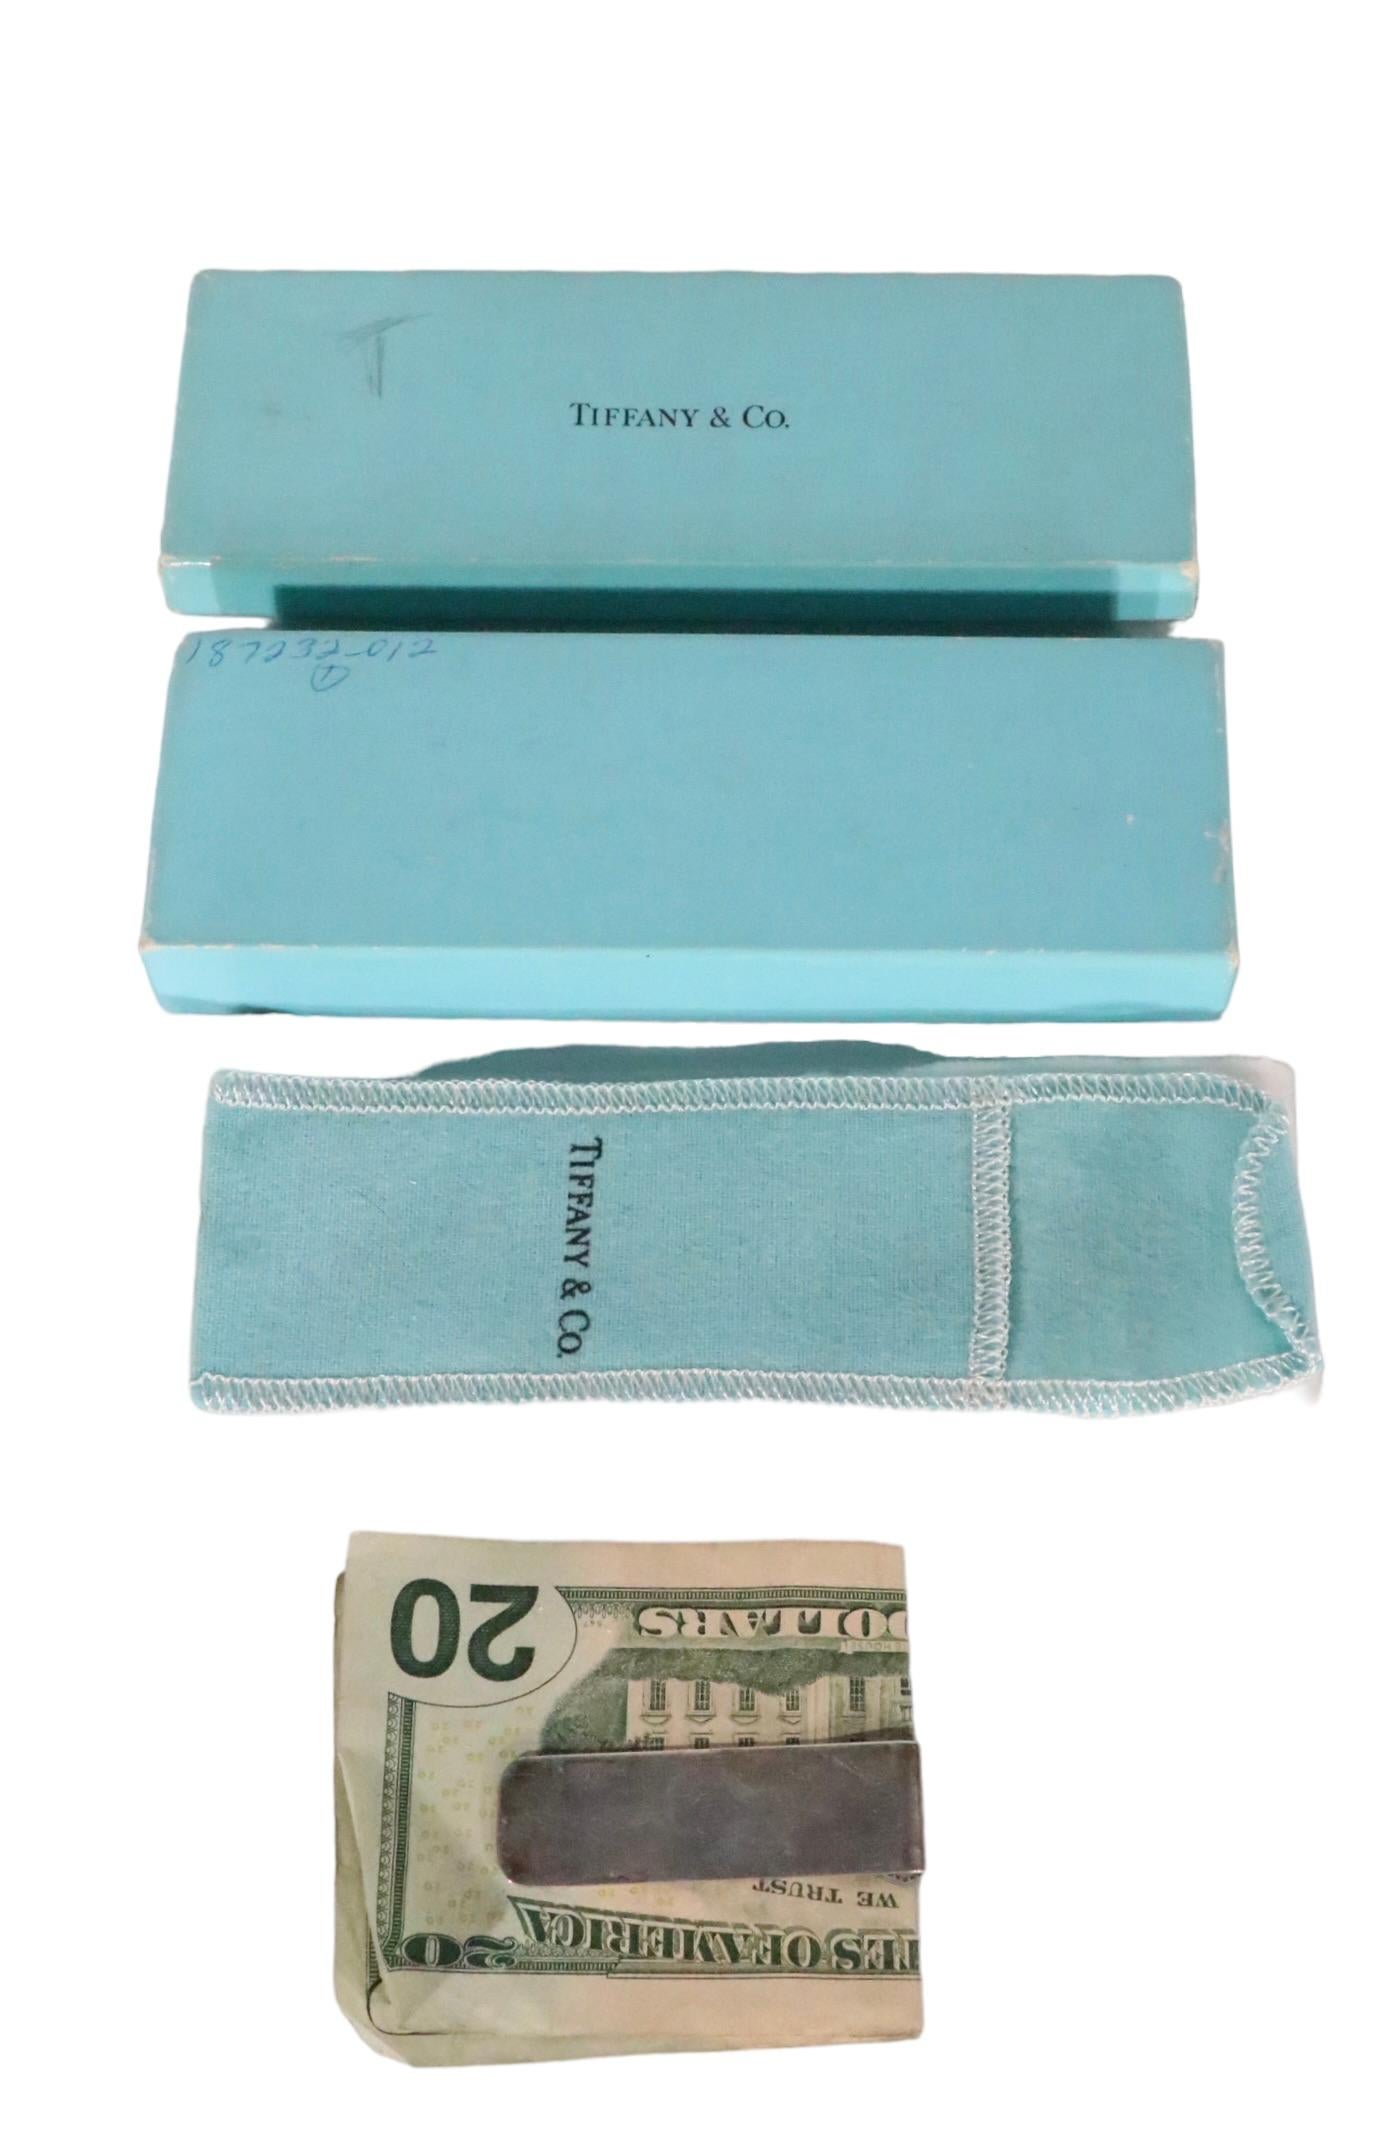 Timeless, chic and always voguish, Tiffany Sterling money clip. The clip is in good, original condition, showing some cosmetic wear, normal and consistent with age. It came to me with the box, and pouch shown, and they are included in the lot,